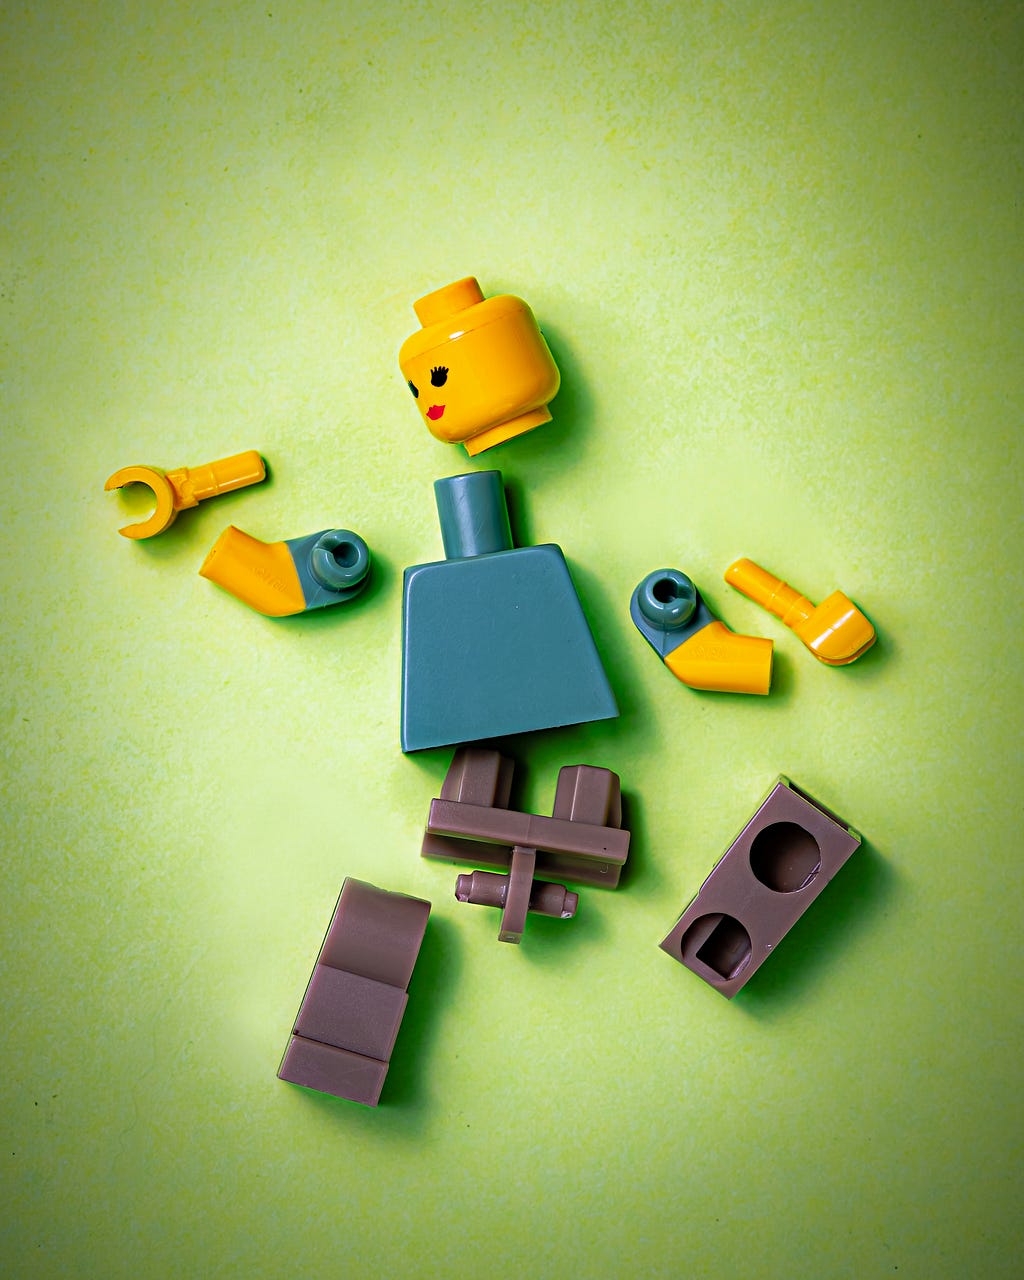 a Lego person with dismantled limbs, depicting injury.